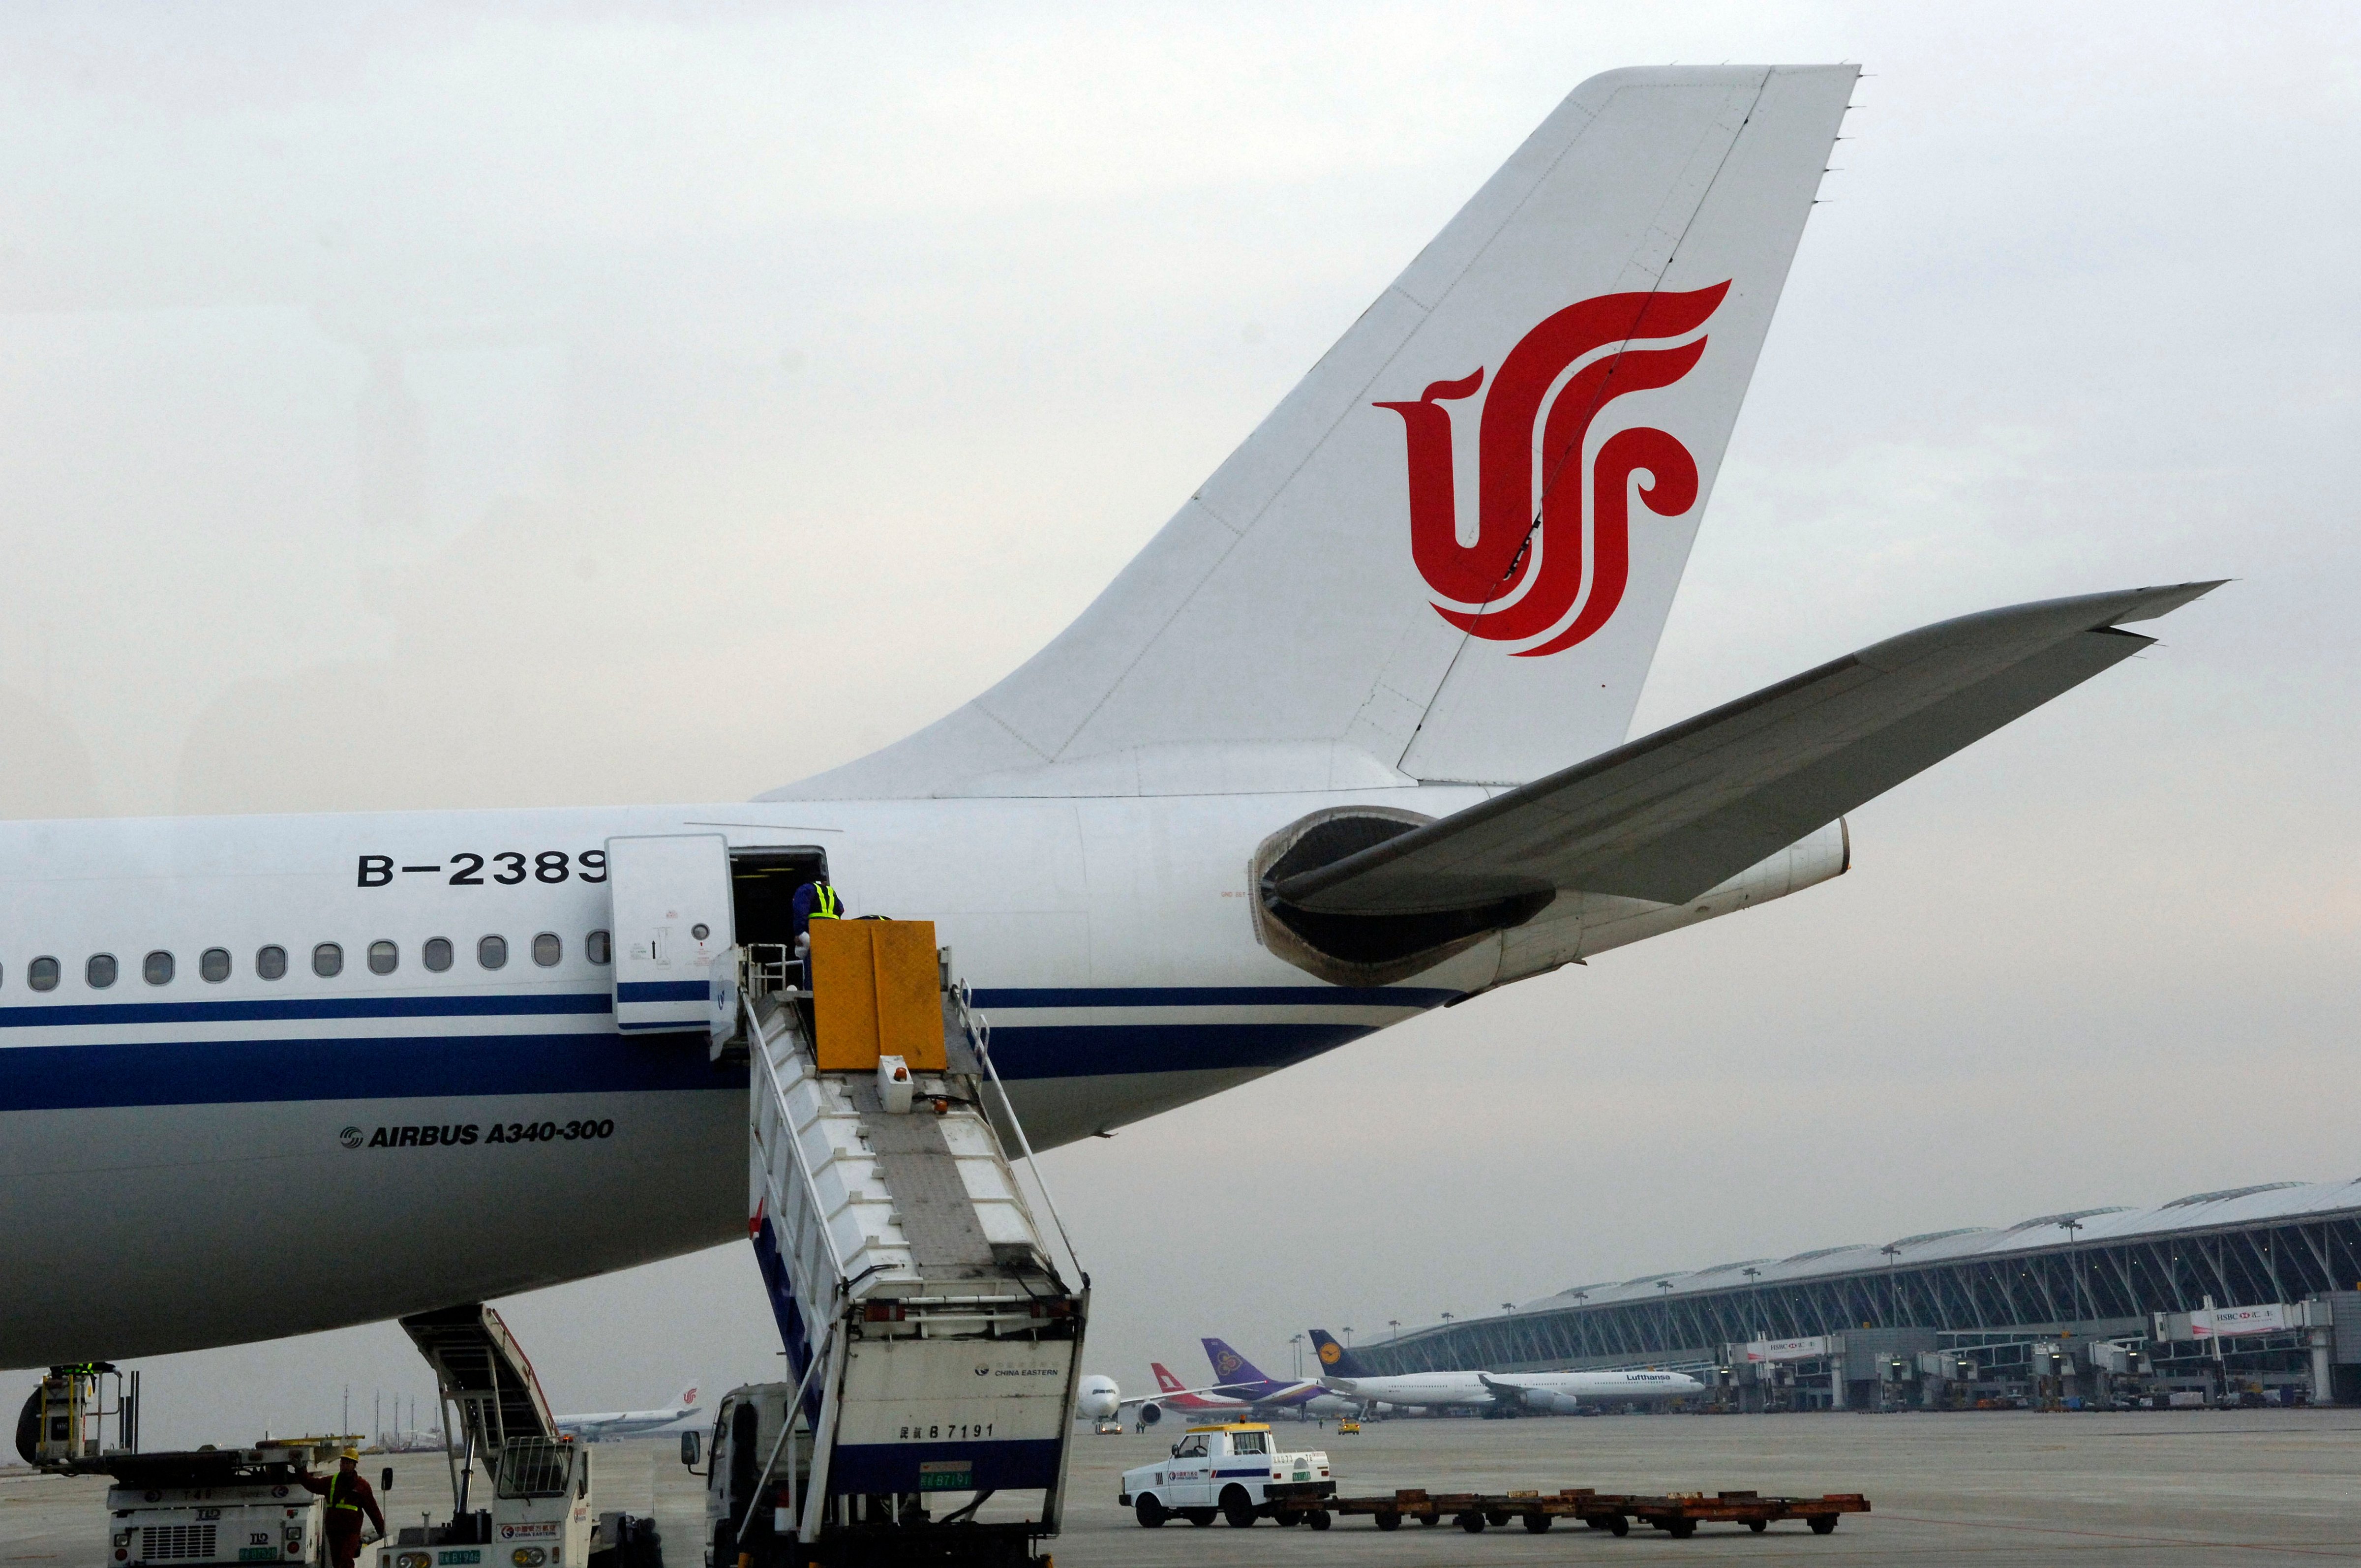 The tail of an Airbus plane of Air China in Beijing